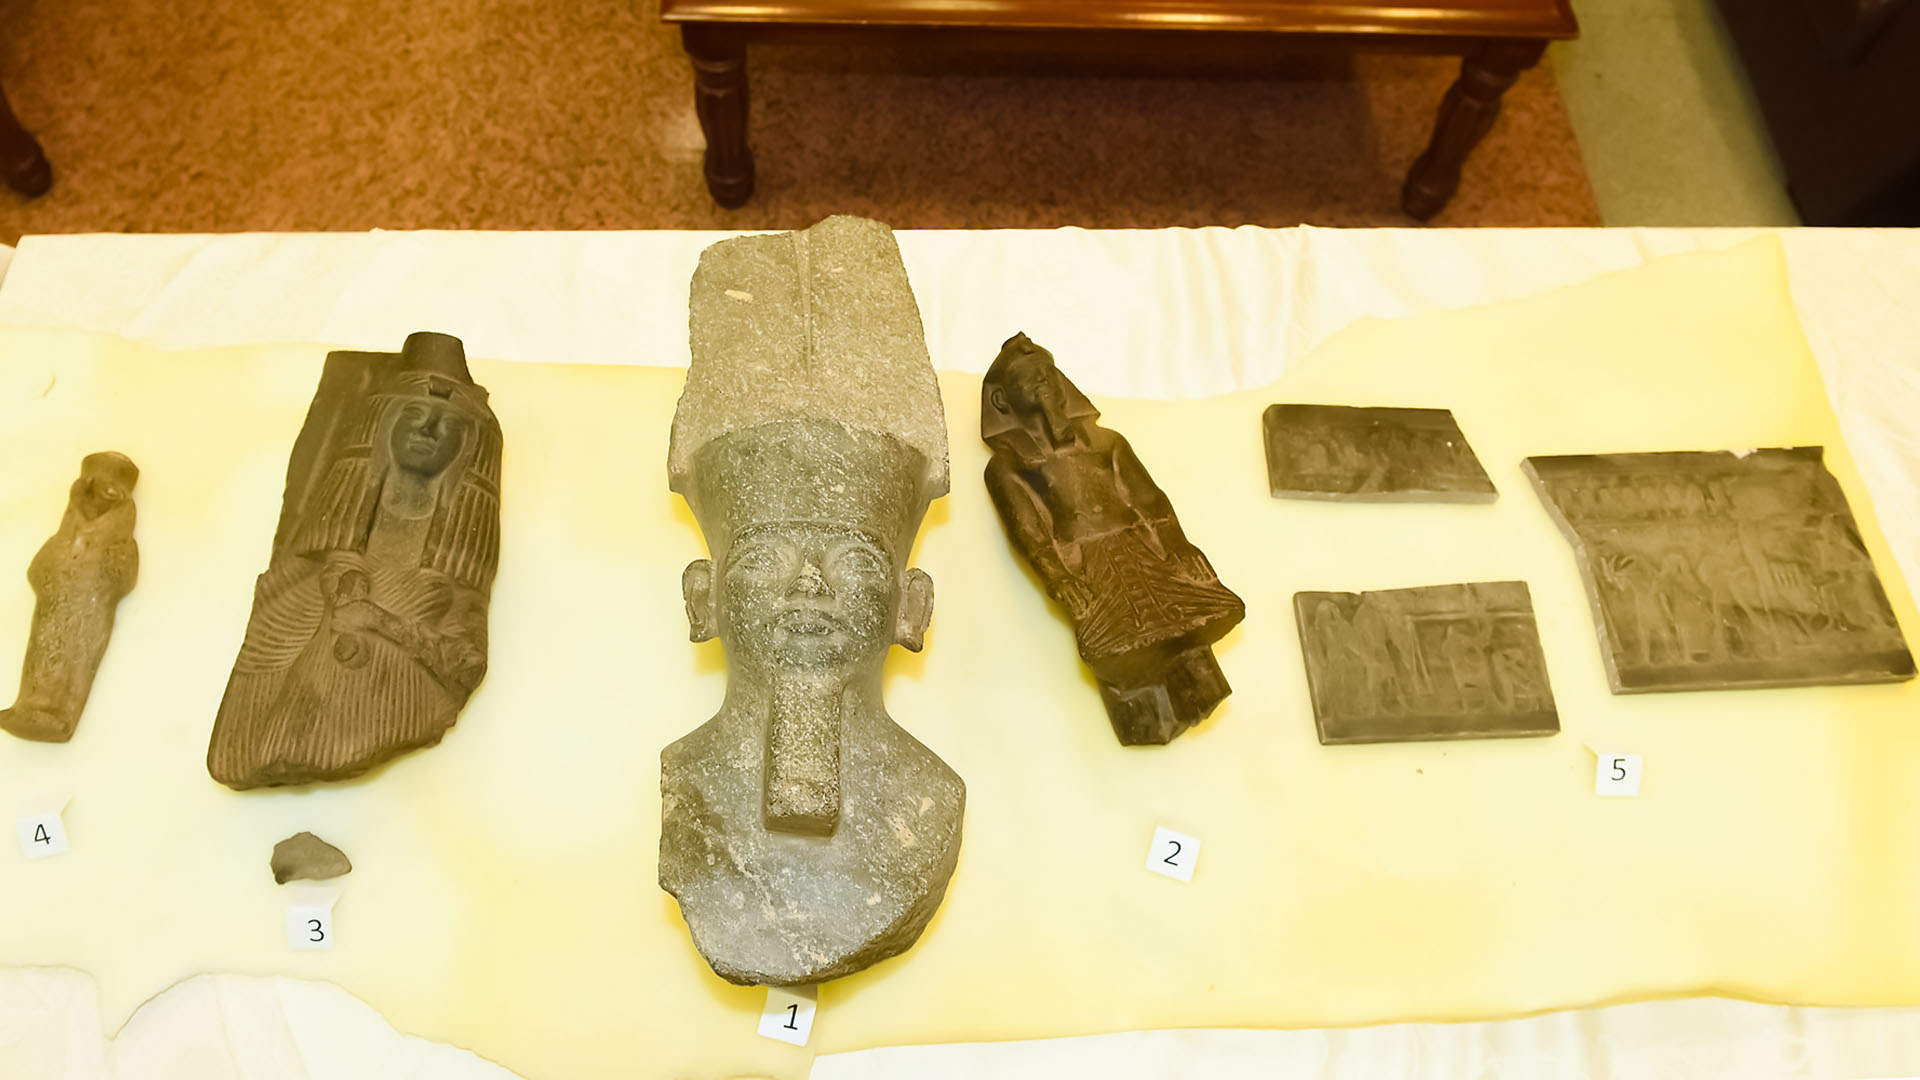 Kuwait returns five pharaonic artifacts to Egypt after failed smuggling attempt